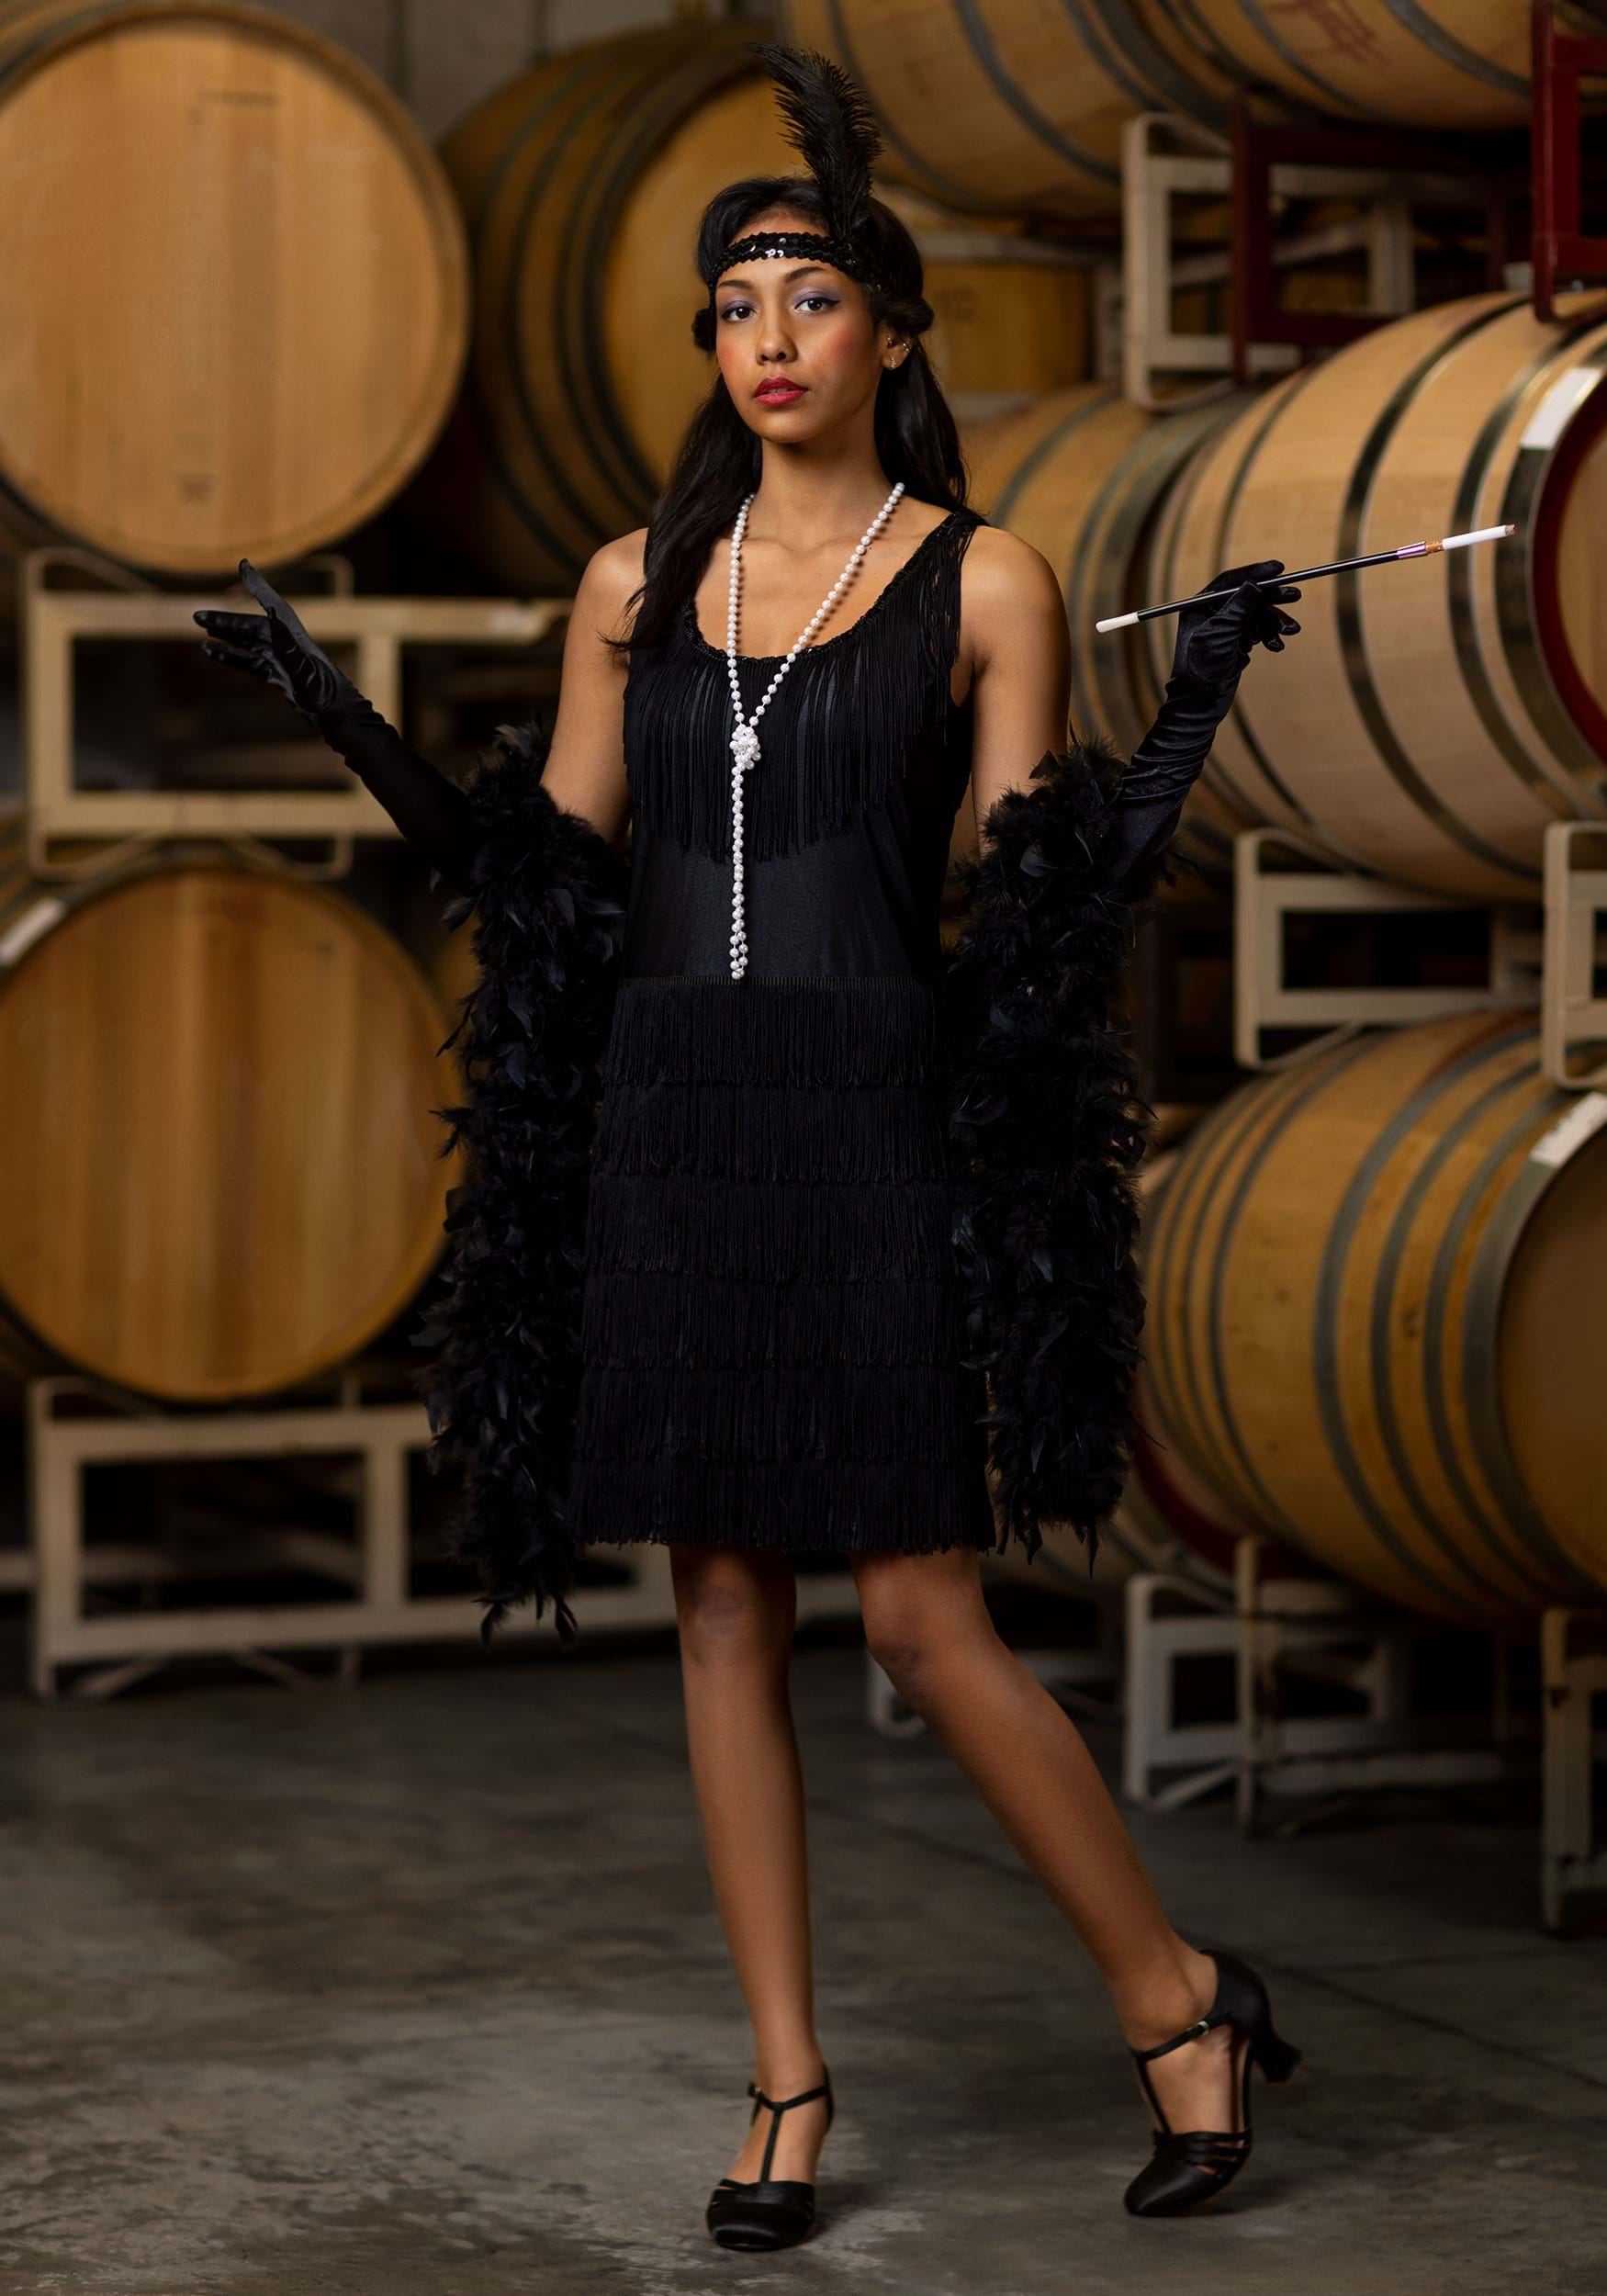 sexy flapper girl costume